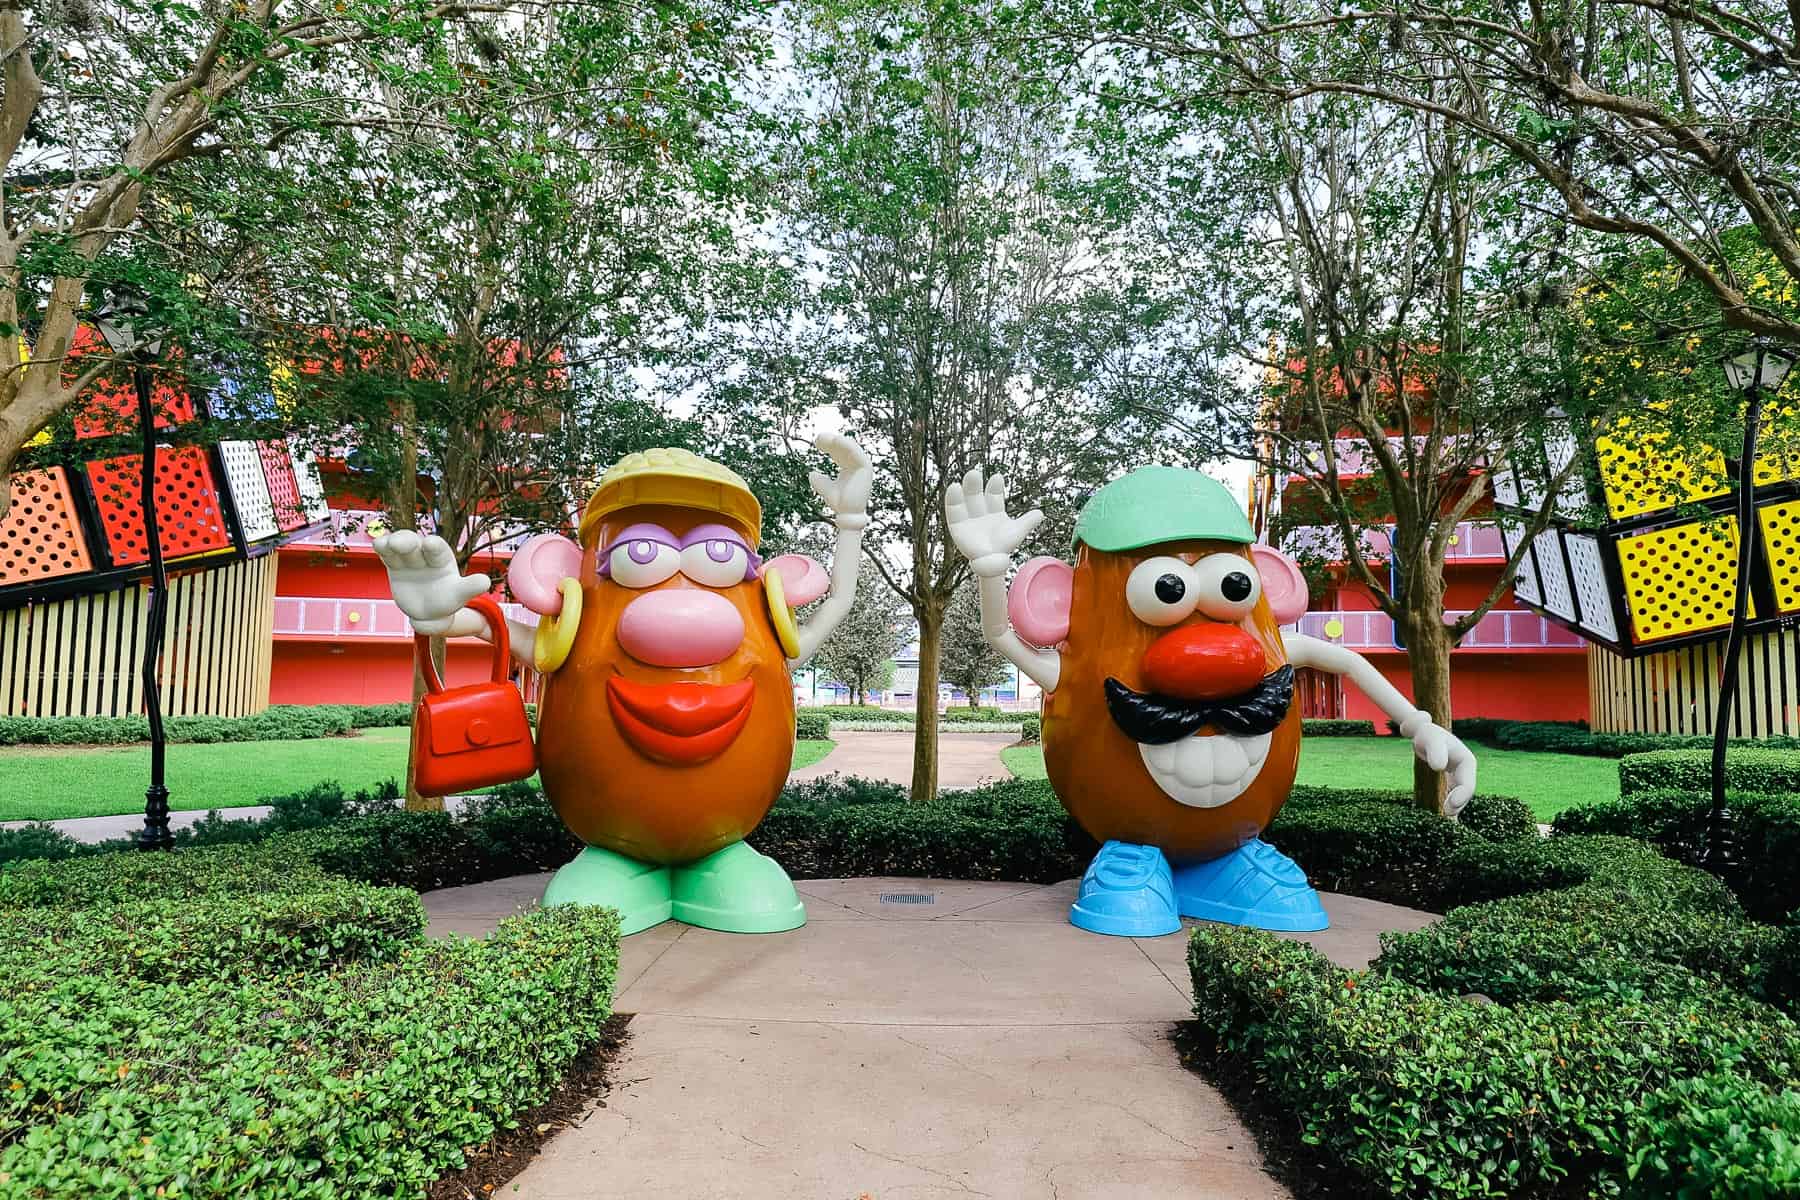 Mr. and Mrs. Potato Head are popular theming elements at Pop Century. 